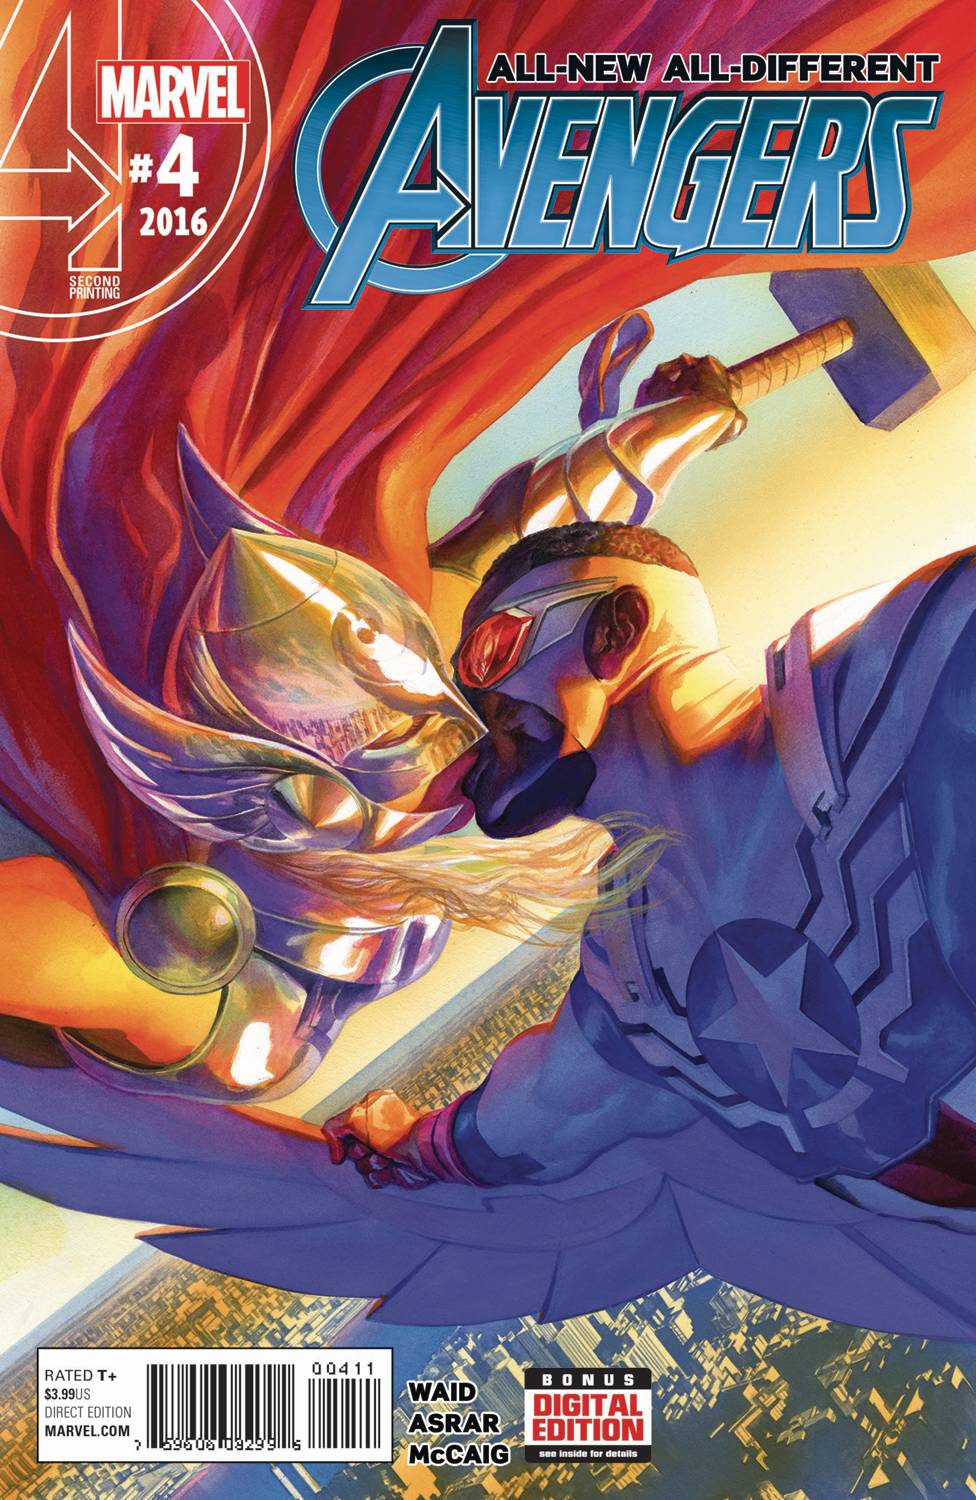 All New All Different Avengers #4 Alex Ross 2nd Printing Variant